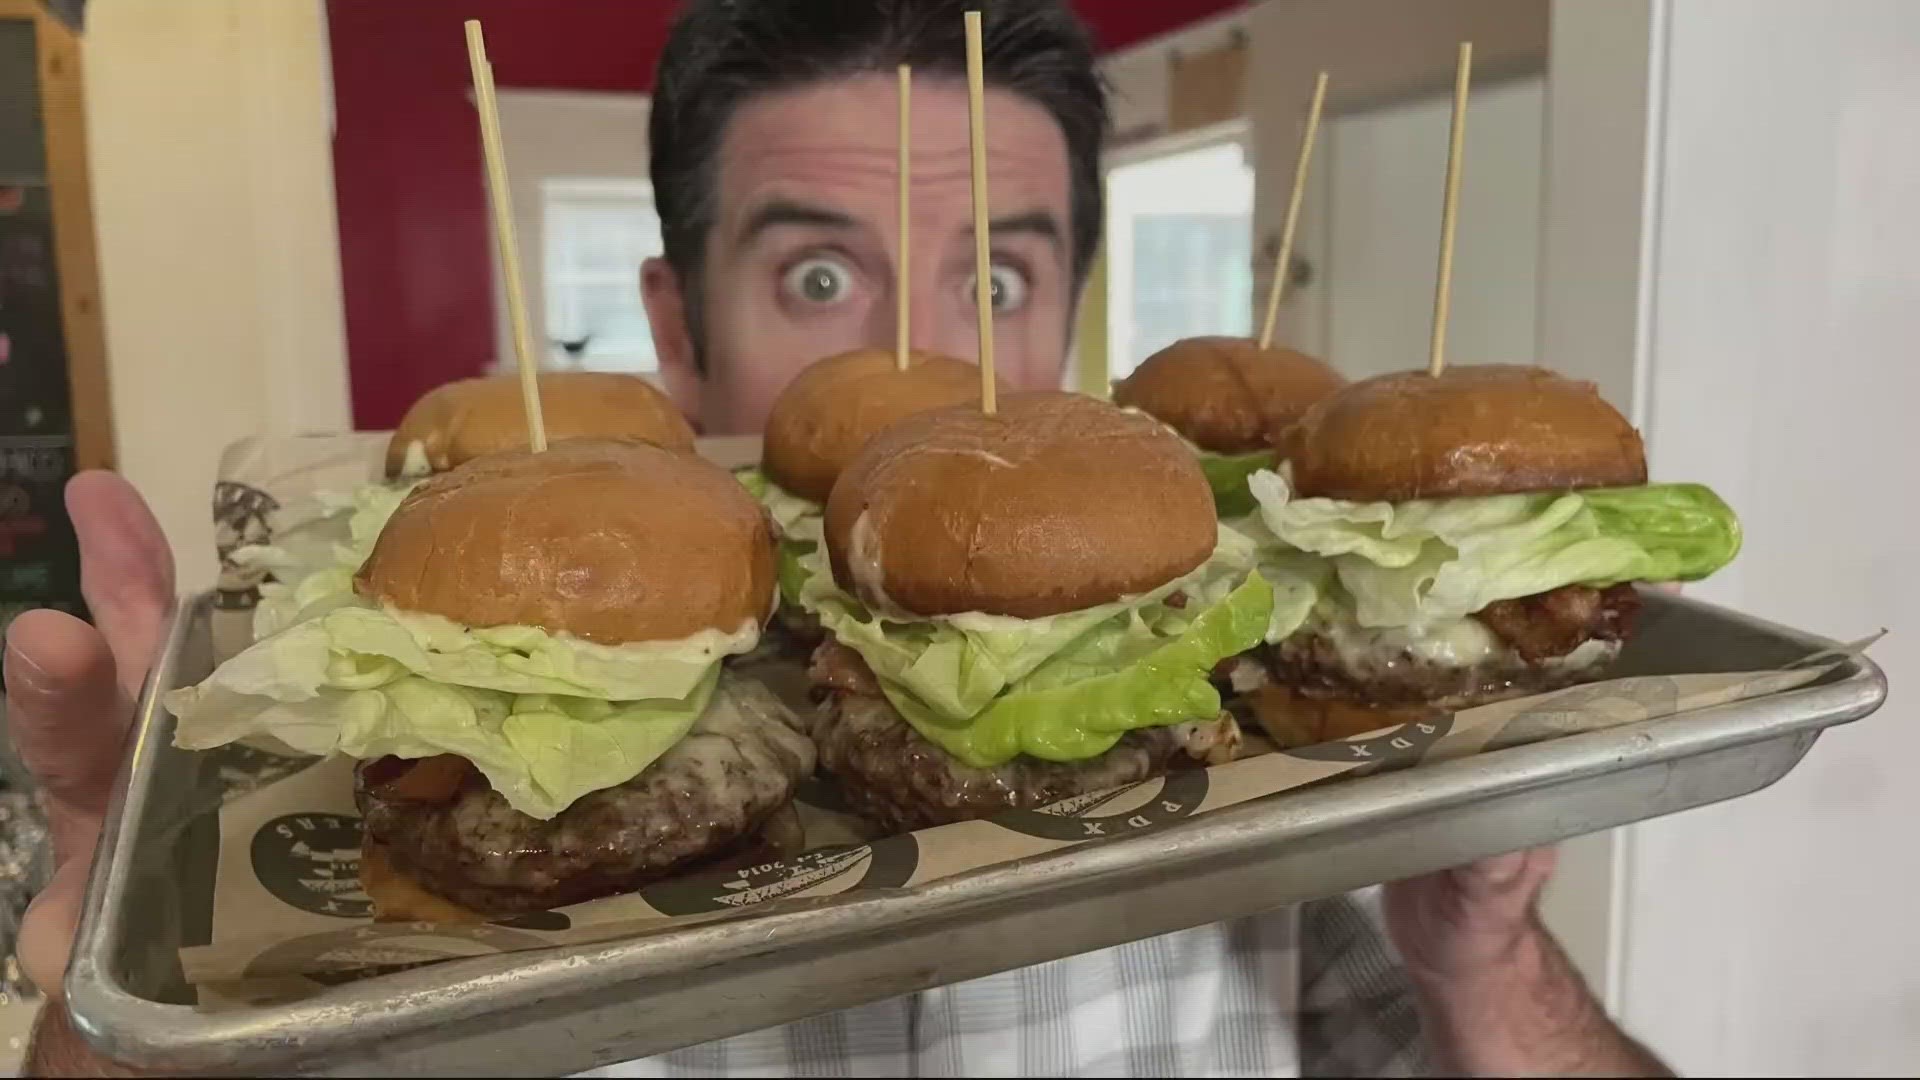 What makes a great cheeseburger? Drew Carney checked out the menu at PDX Sliders for National Cheeseburger Day on Sept. 18.